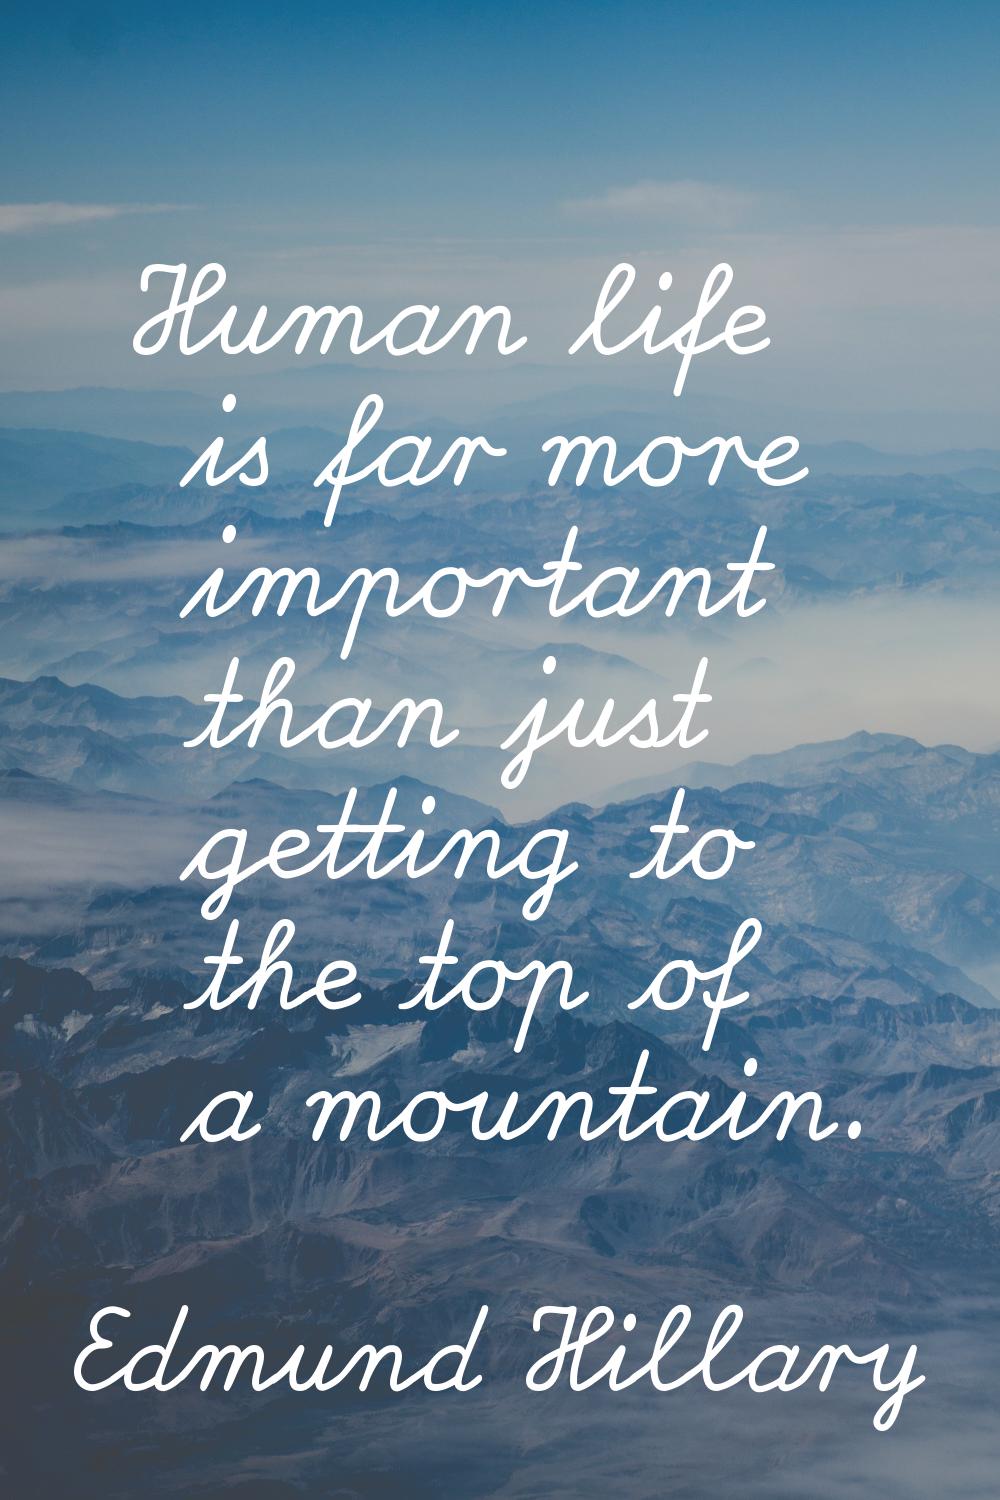 Human life is far more important than just getting to the top of a mountain.